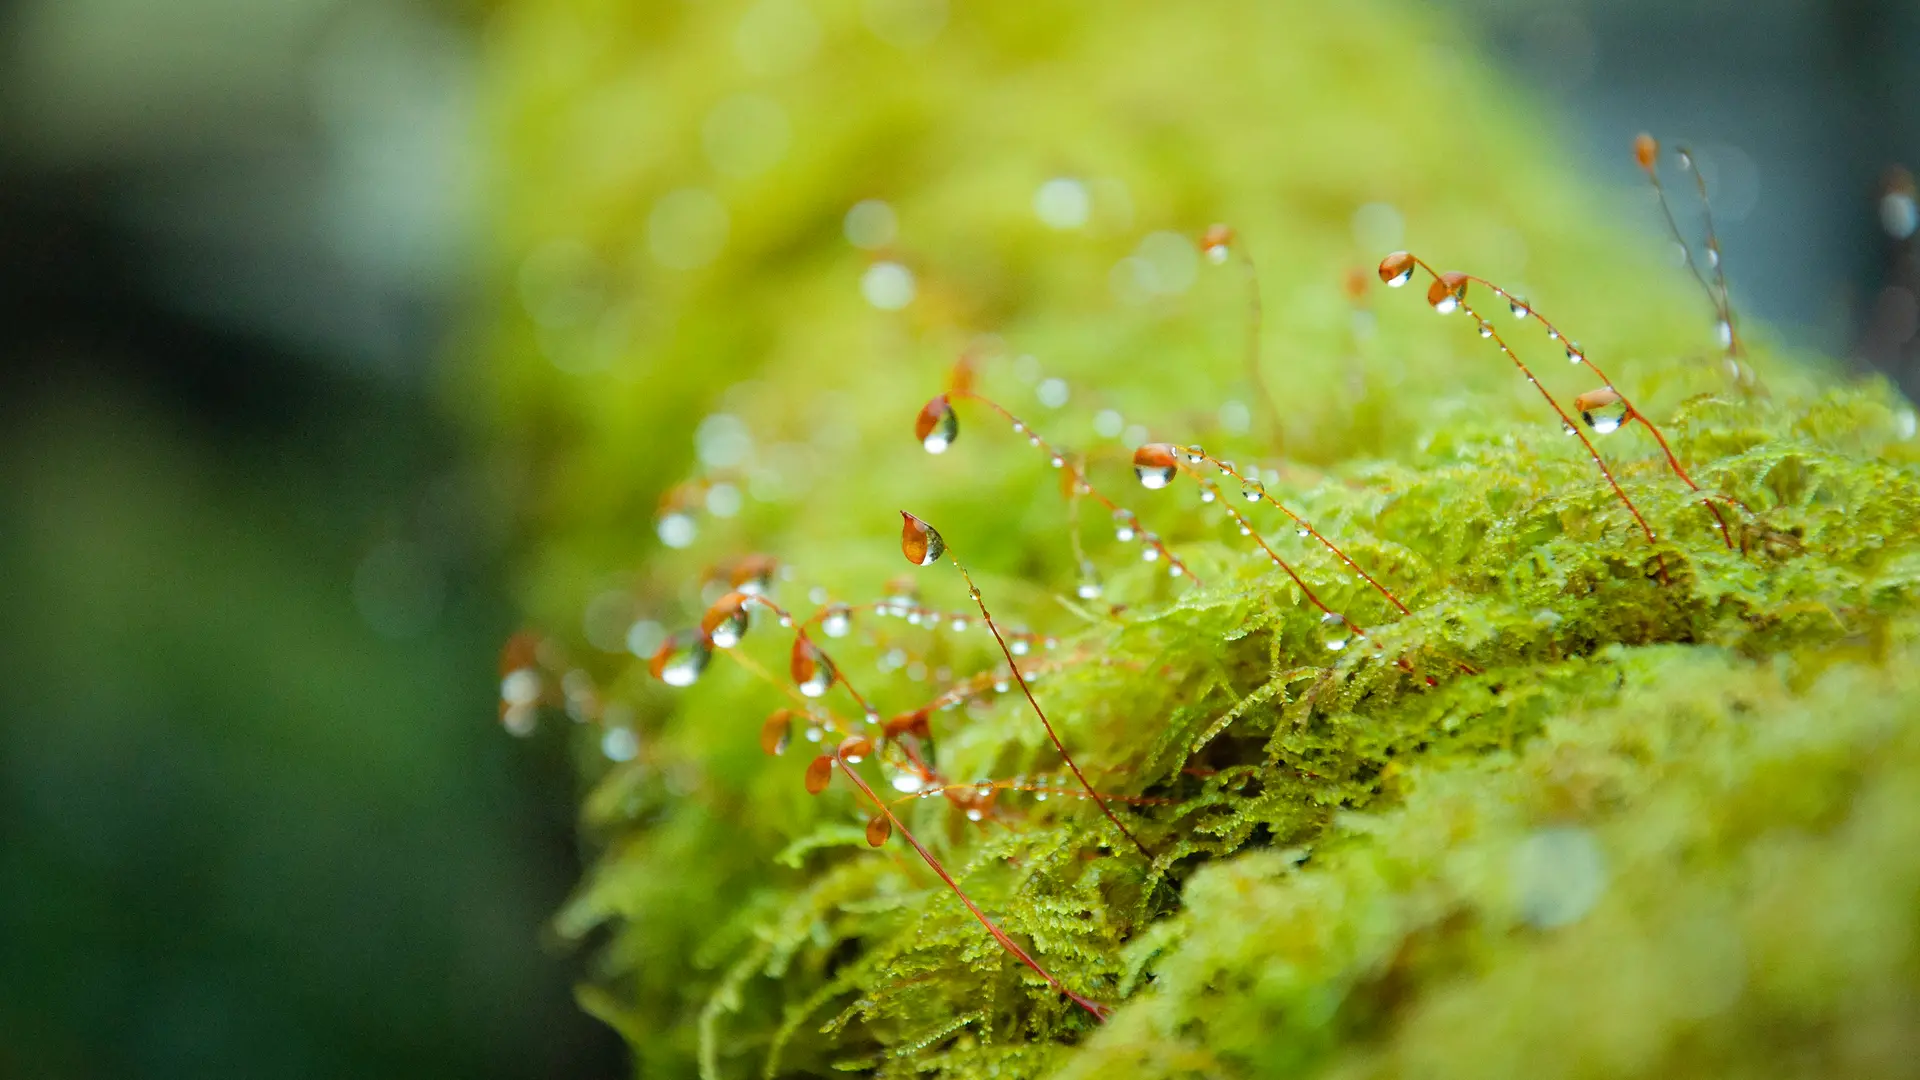 Moss with spore capsules and dew